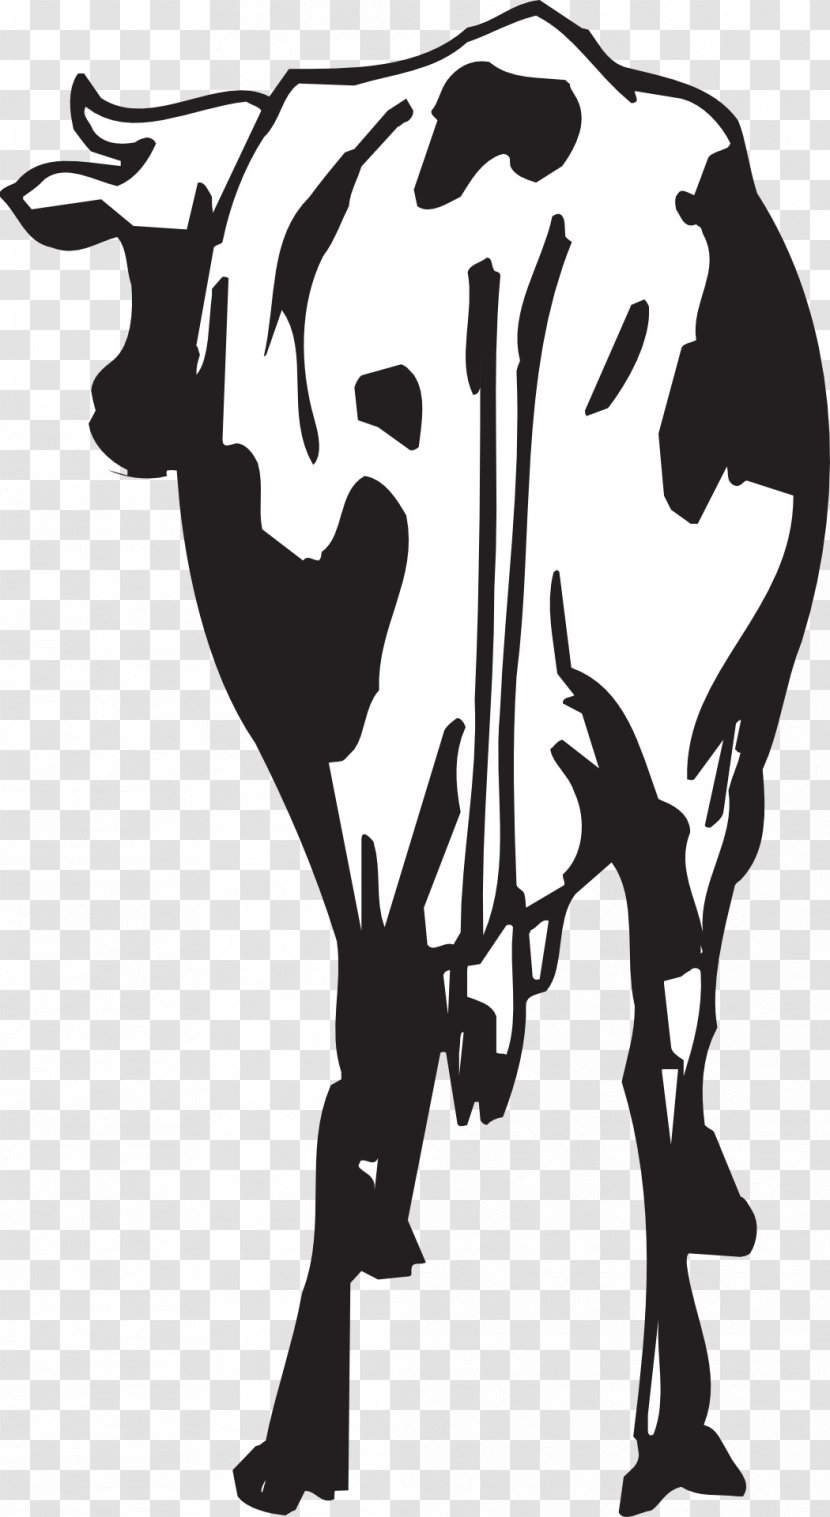 Dairy Cattle Dressed In Wires Clip Art - Grazing - Milk Transparent PNG